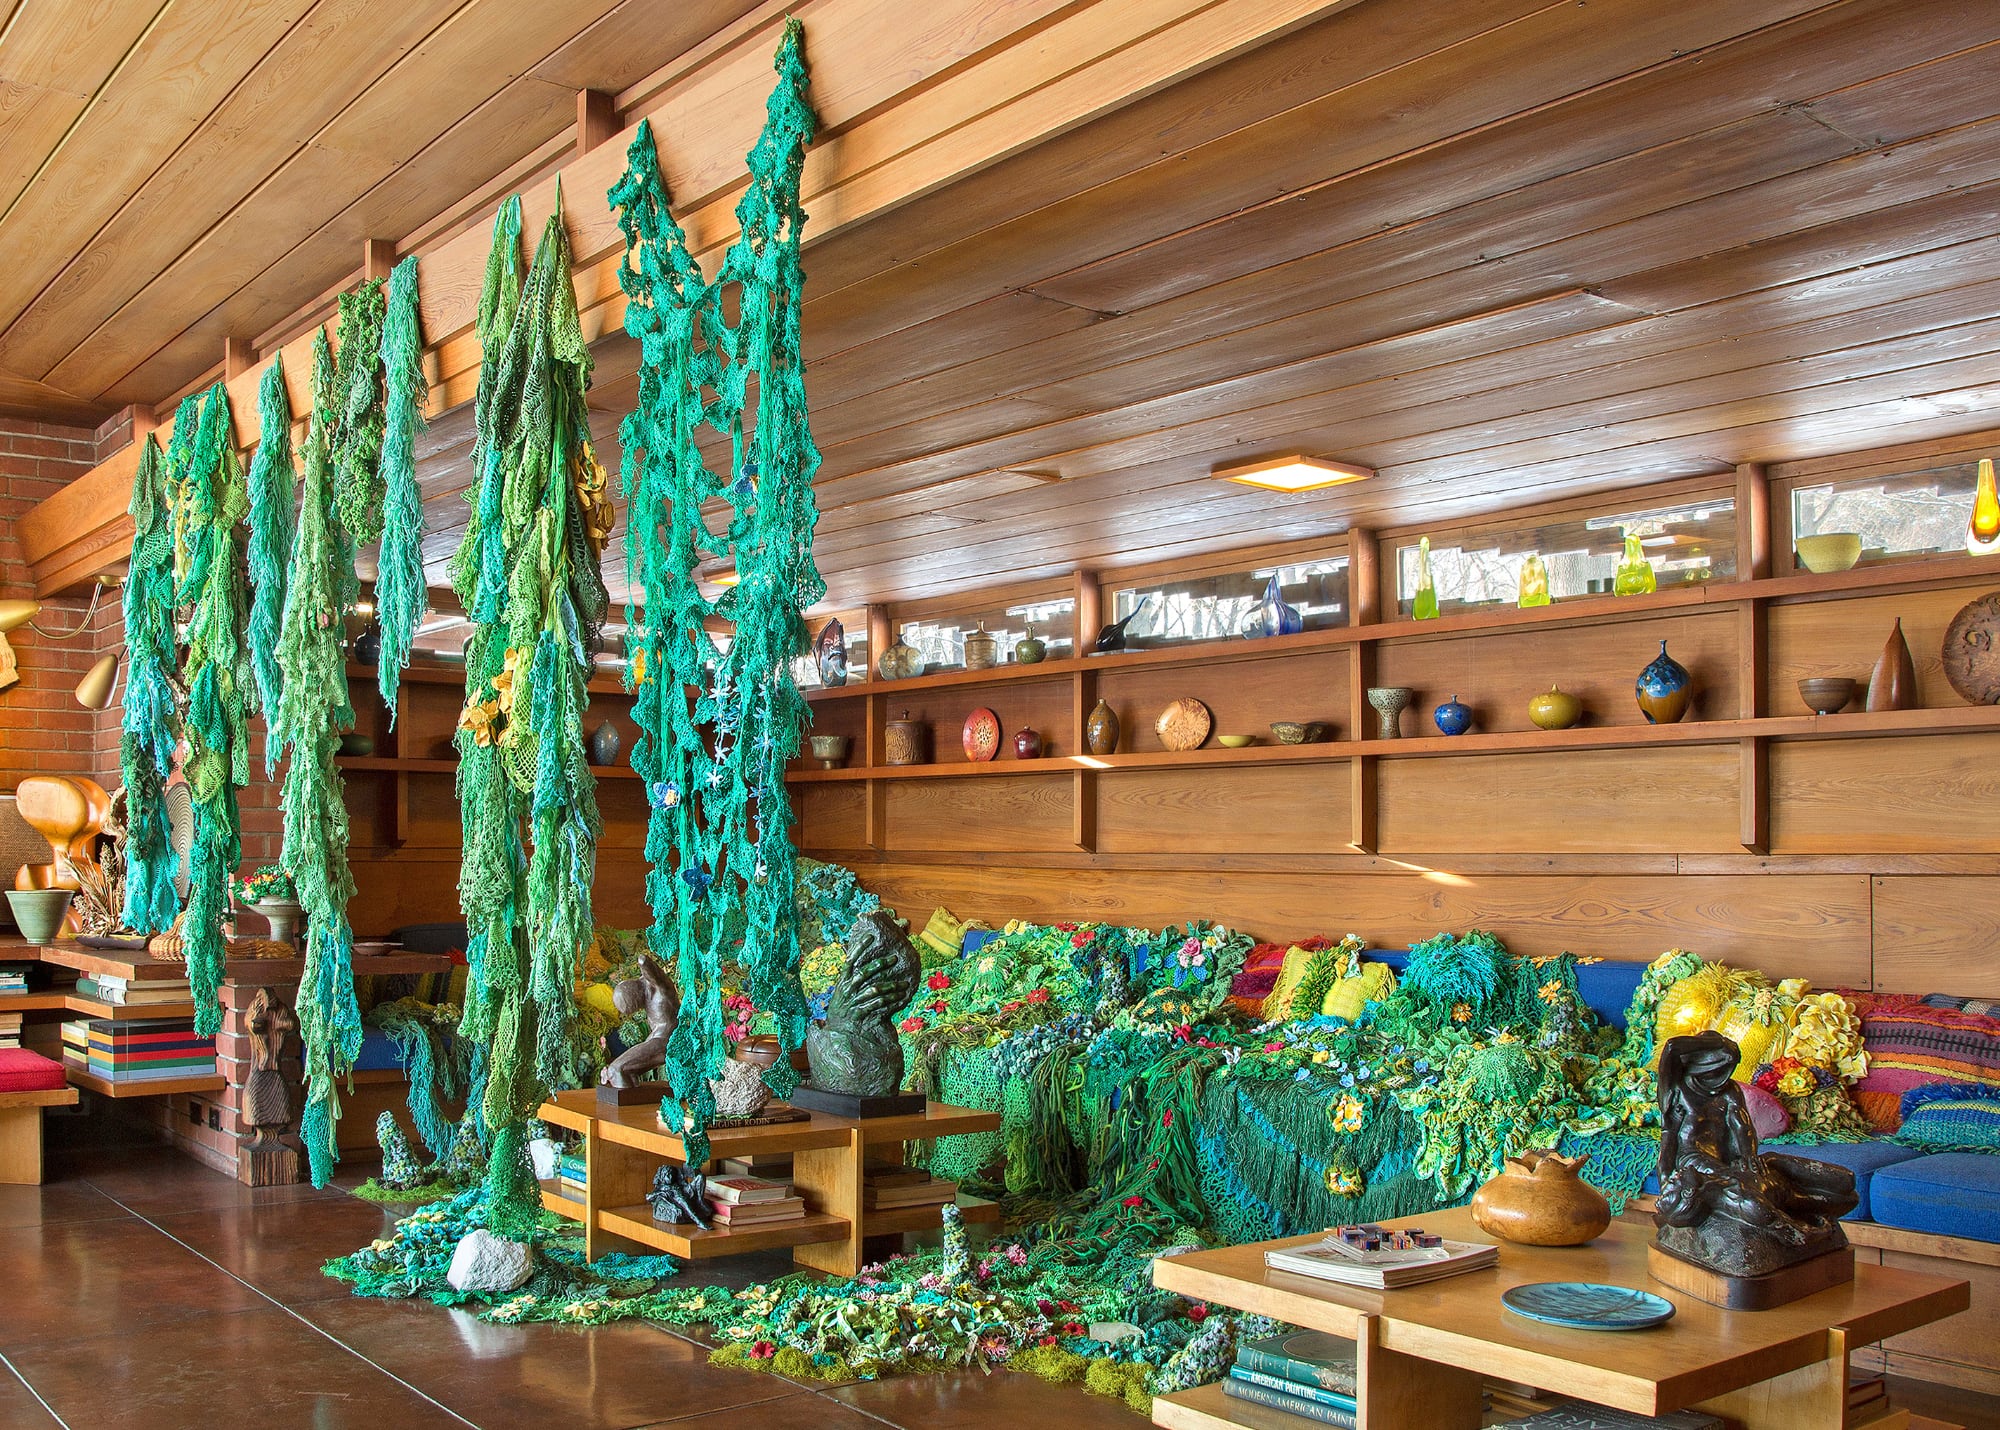 green crocheted forms hang from a wooden ceiling with crocheted flora on a nearby bench